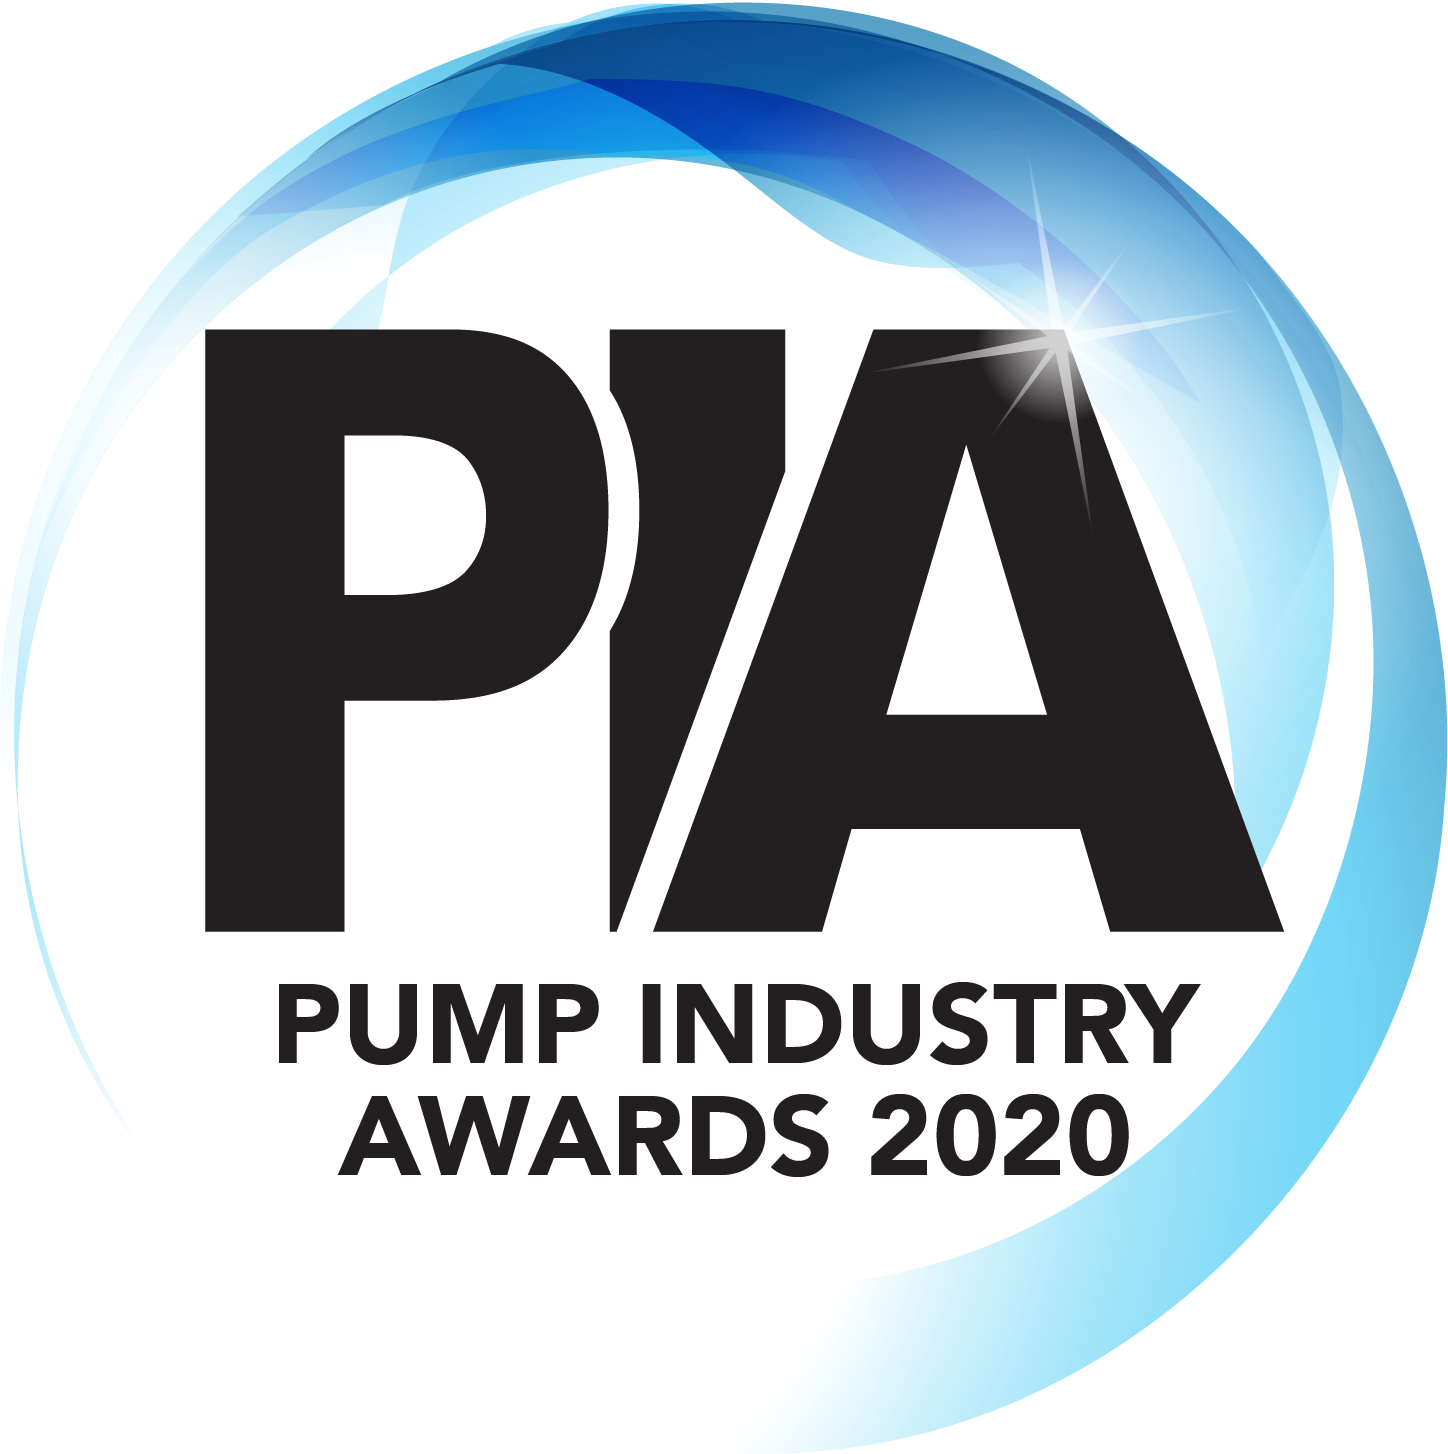 The 2020 Pump Industry Awards (PIA) ceremony, due to take place in December, has now been rescheduled to 25 March 2021.